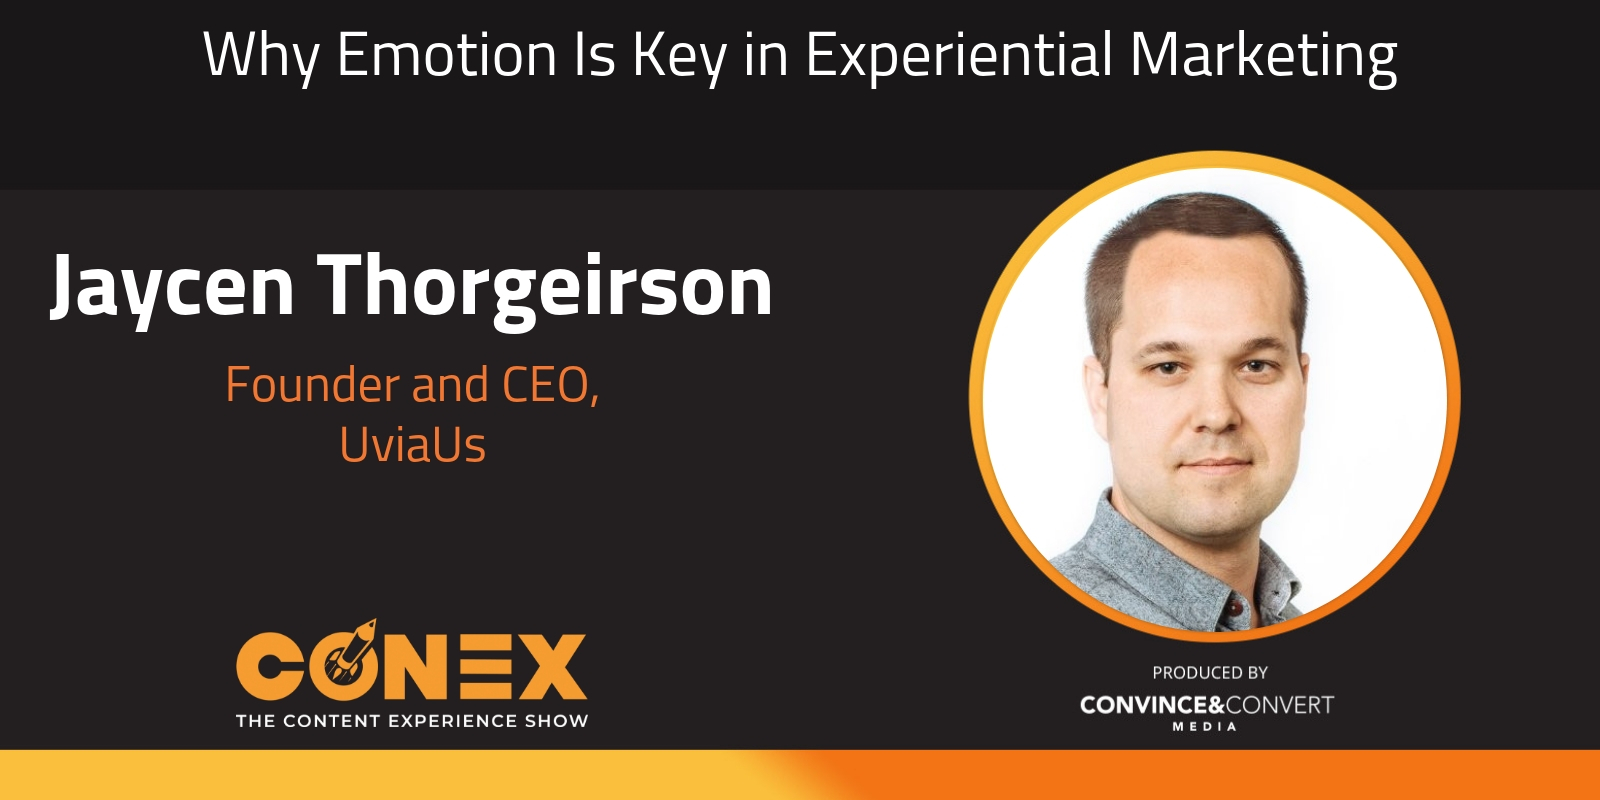 Why Emotion Is Key in Experiential Marketing